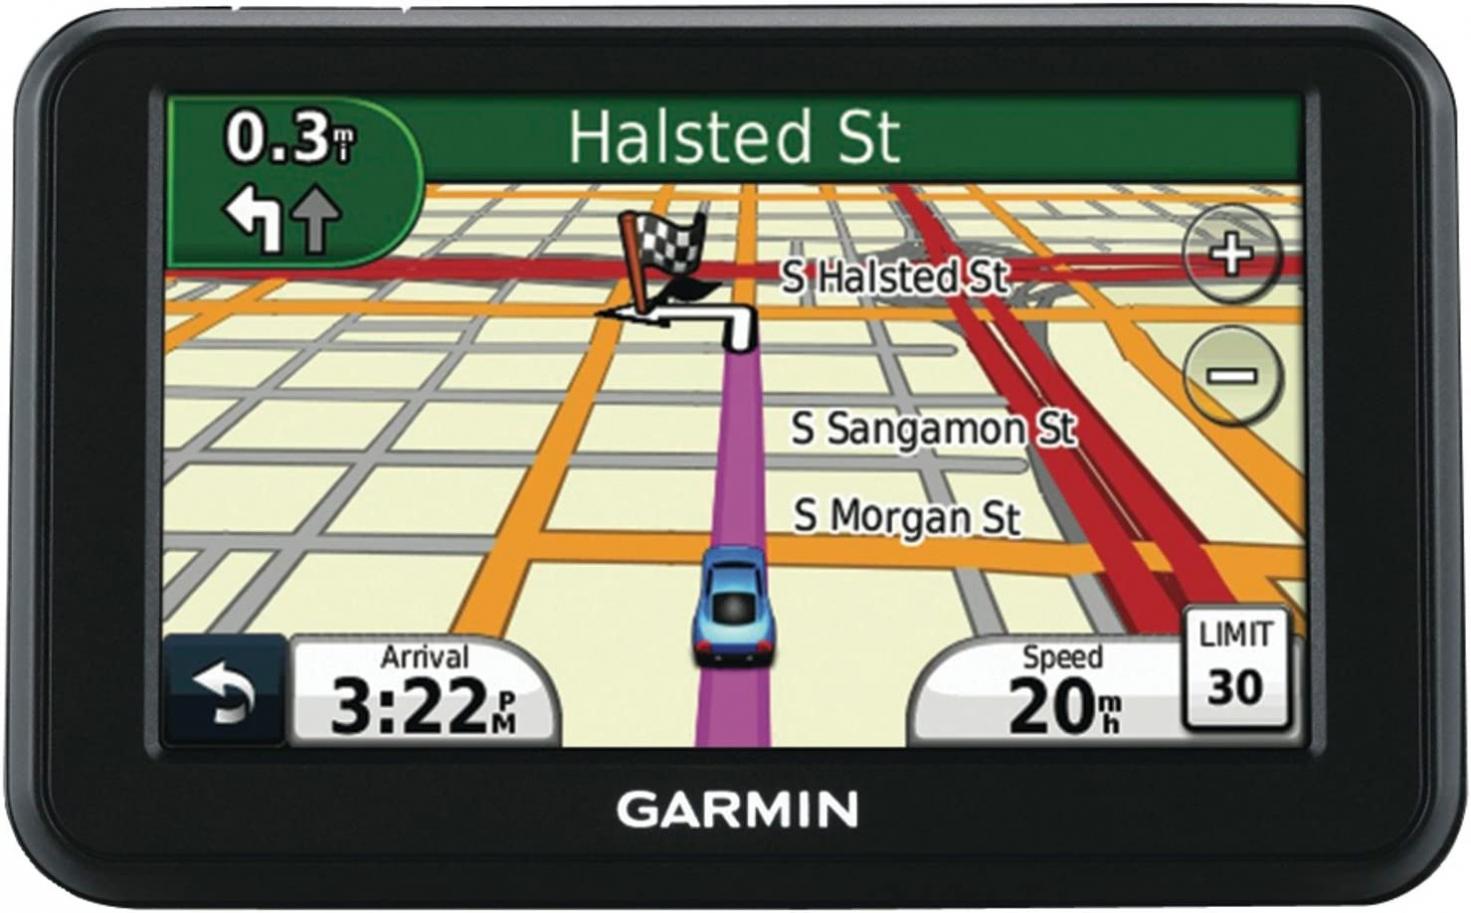 Garmin nüvi 40 4.3-inch Portable GPS Navigator(US Only) (Discontinued by Manufacturer)